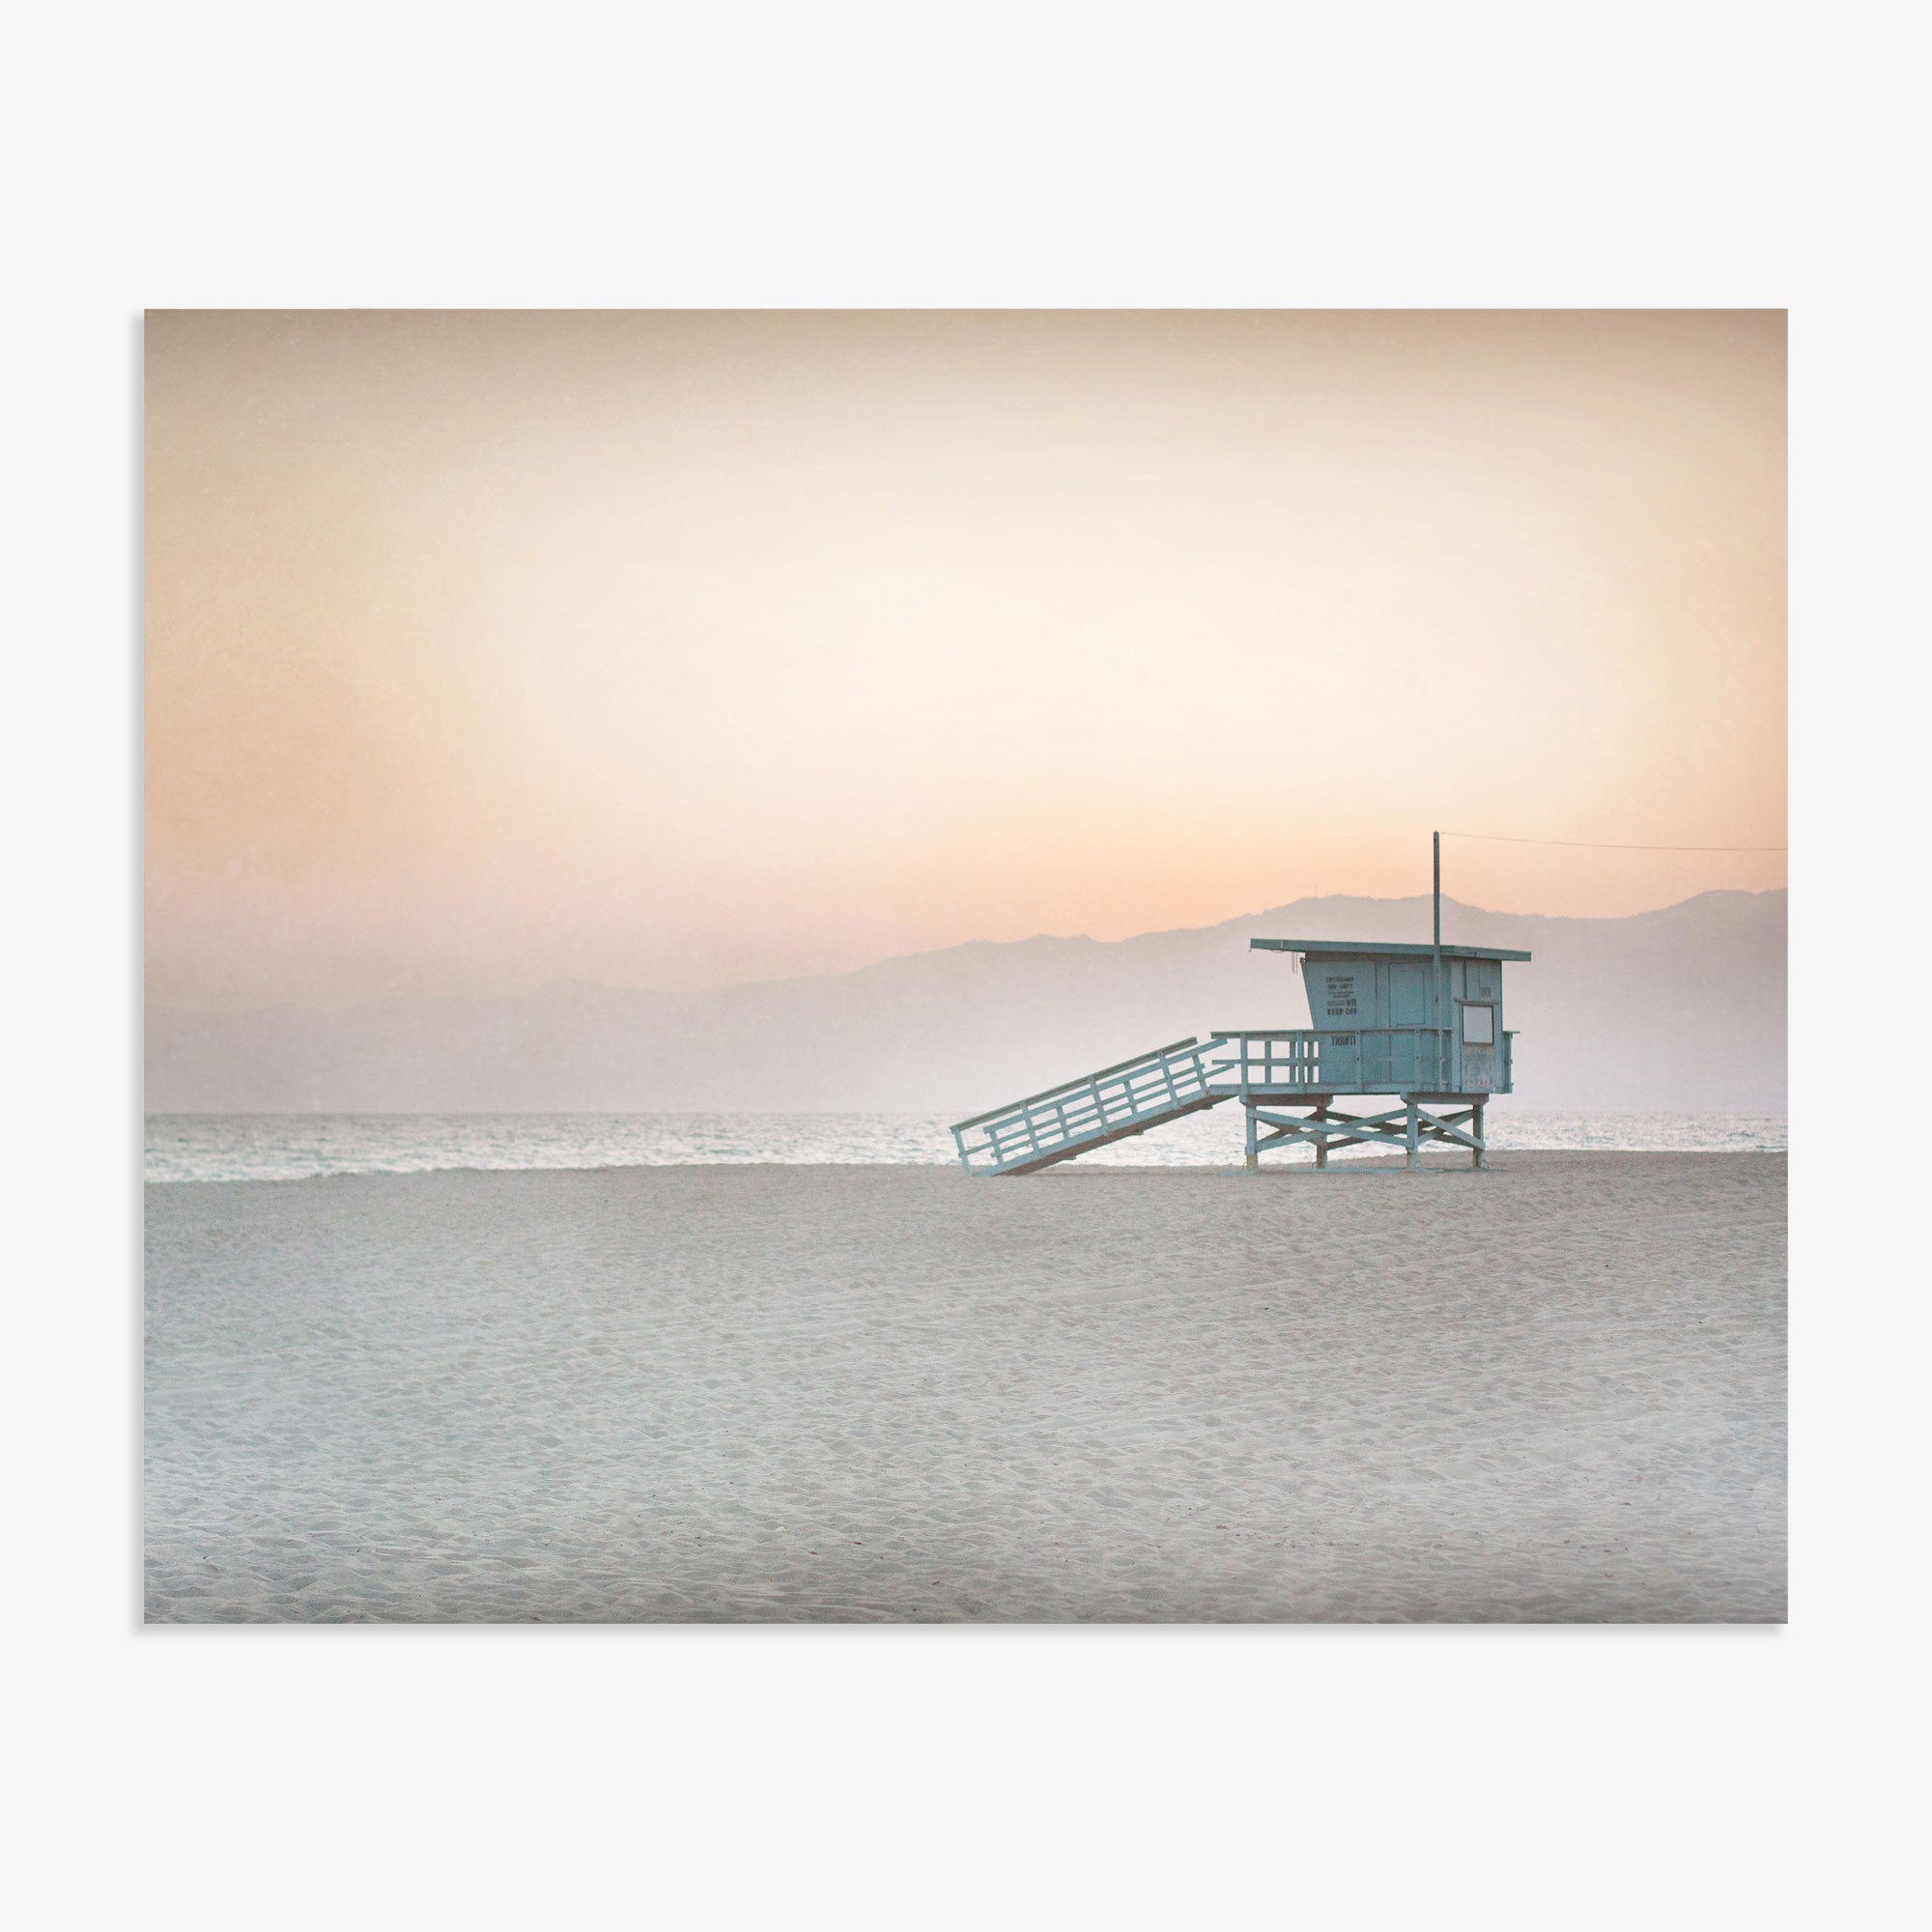 A Pink Coastal Print, &#39;Lifeguard Tower&#39; by Offley Green stands isolated on a sandy beach in Venice with a calm sea in the background under a soft gradient sky of pastel colors at dawn or dusk.